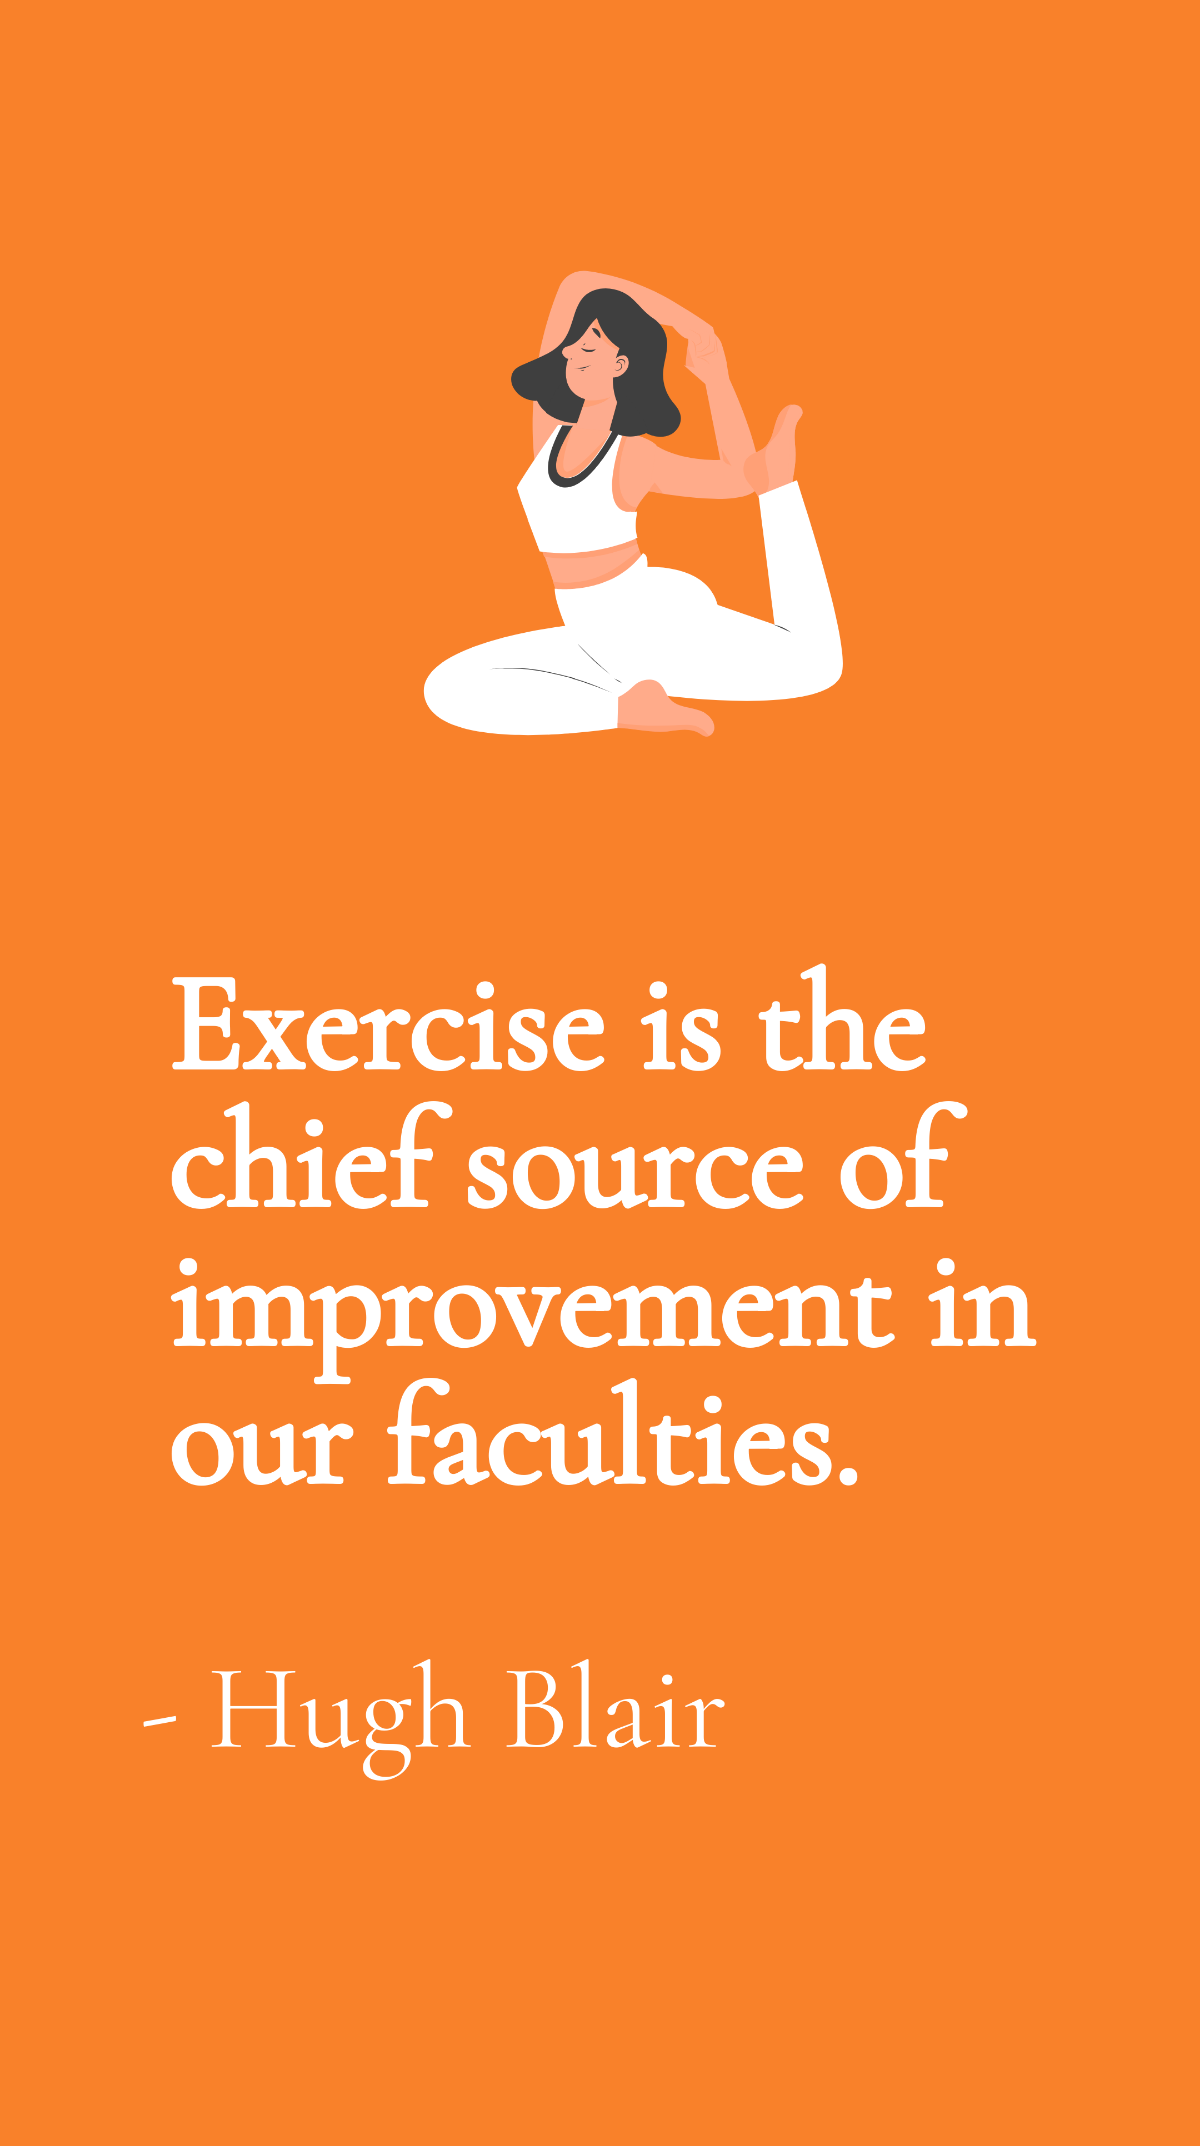 Hugh Blair - Exercise is the chief source of improvement in our faculties. Template